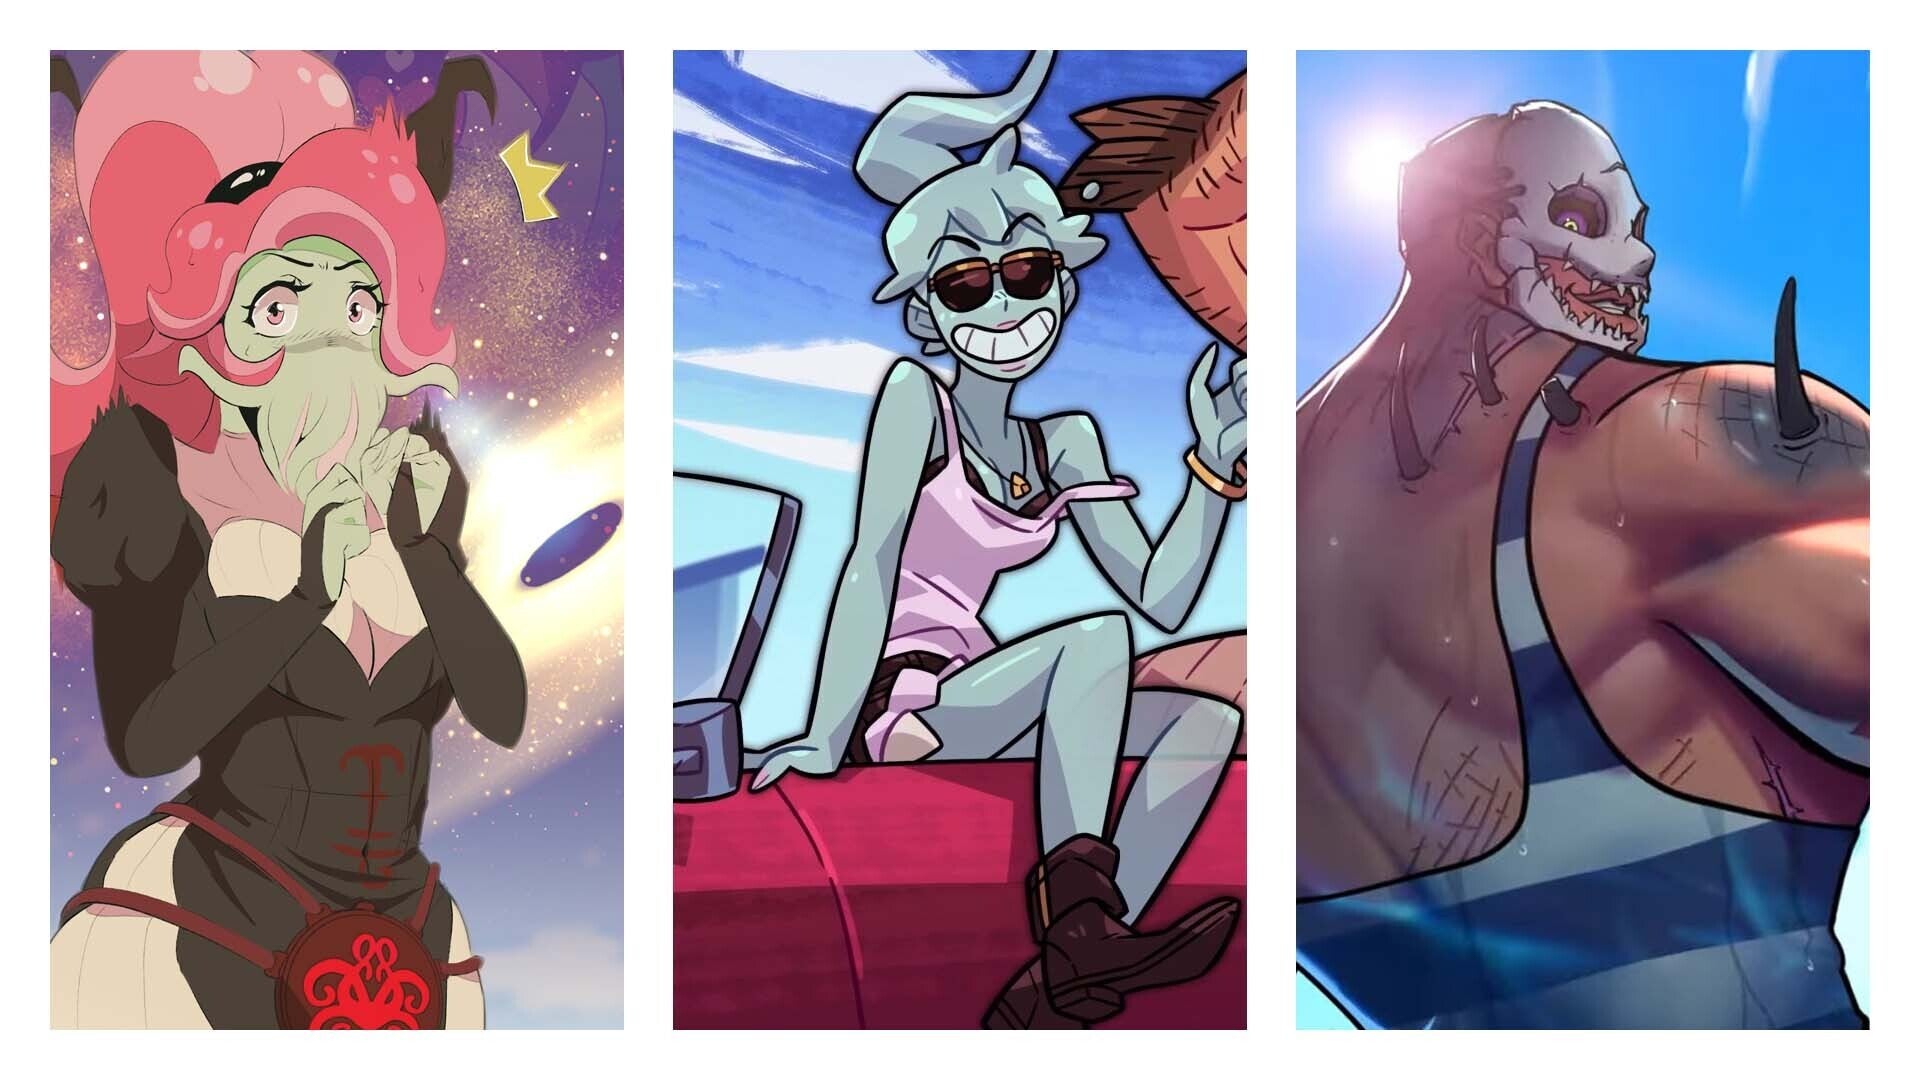 Three monsters you can date in 2022! Left to right: Ln'eta, the cute curvy Cthulhu lady from Sucker For Love: First Date; Polly, the sexy ghost girl from the Monster Prom series; and The Trapper, a gruesome killer from Dead By Daylight as he appears in Hooked On You.